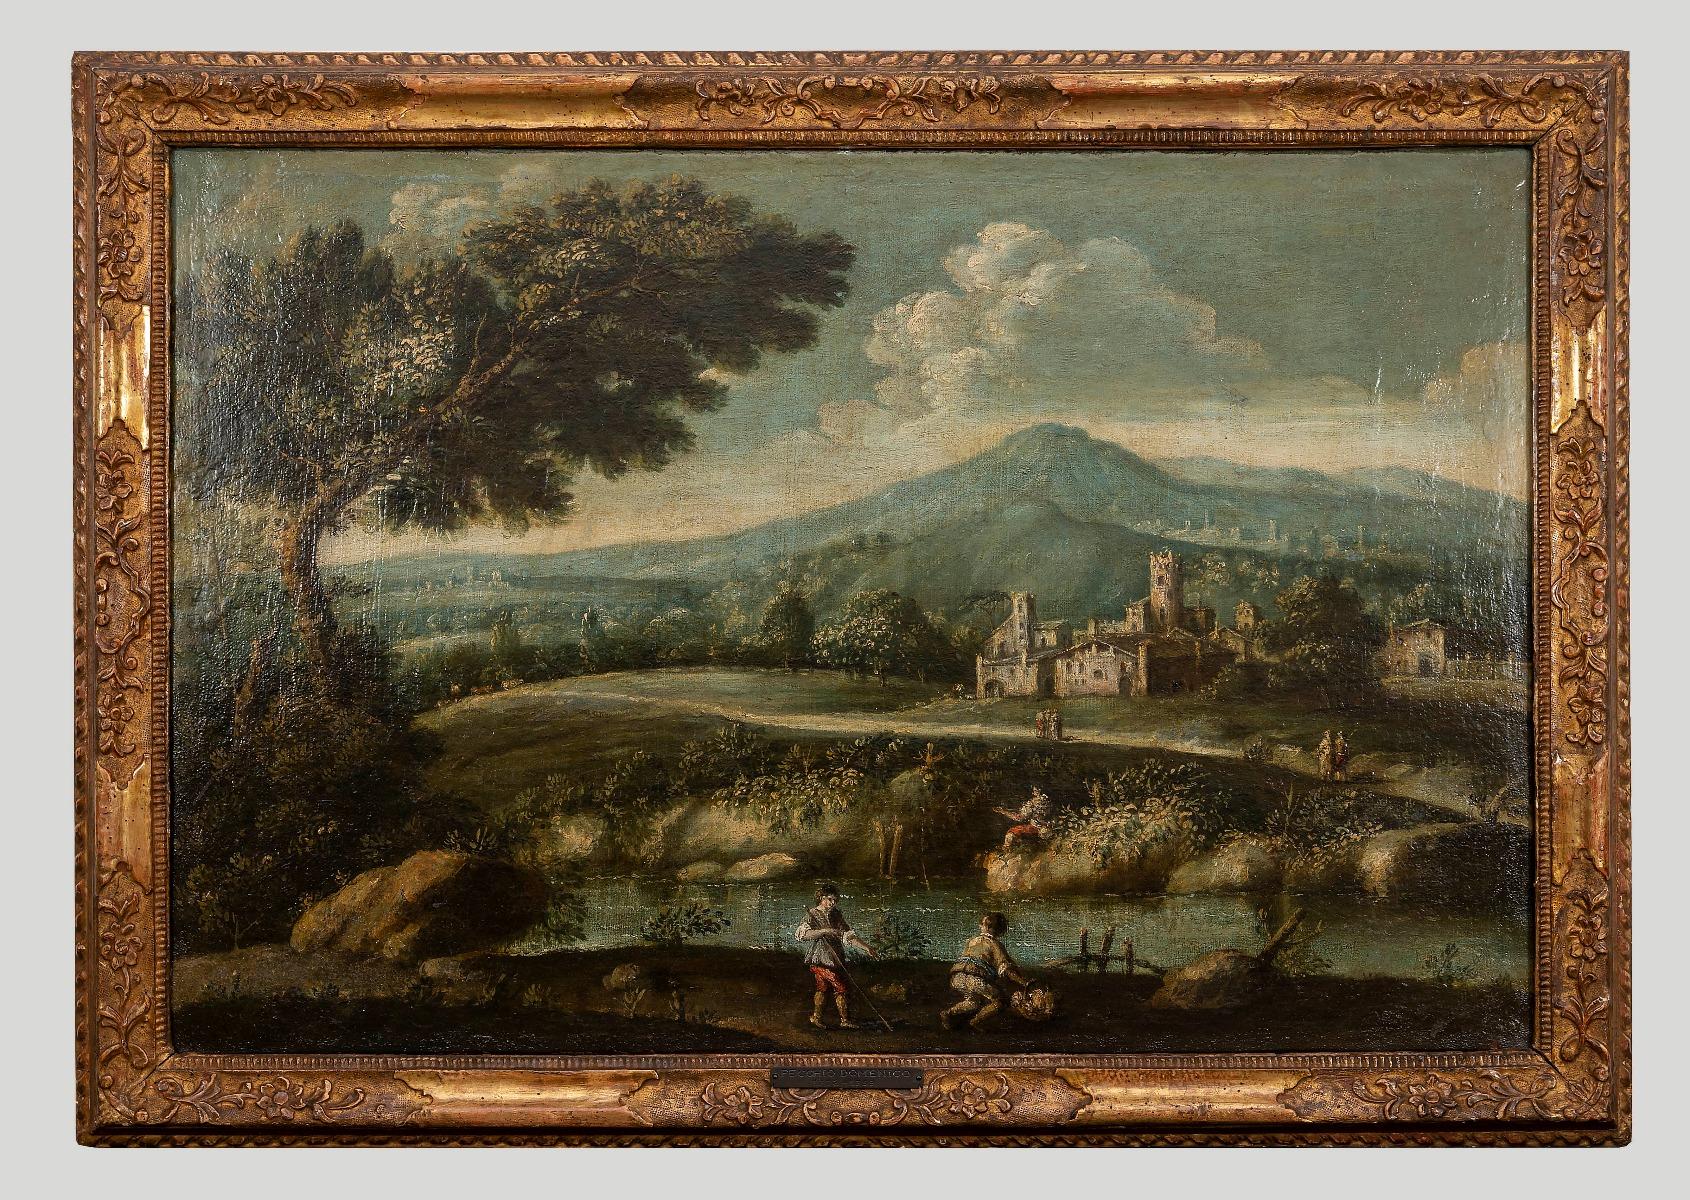 Unknown Figurative Painting - Landscape with figures - Original Oil Paint On Canvas - 18th Century